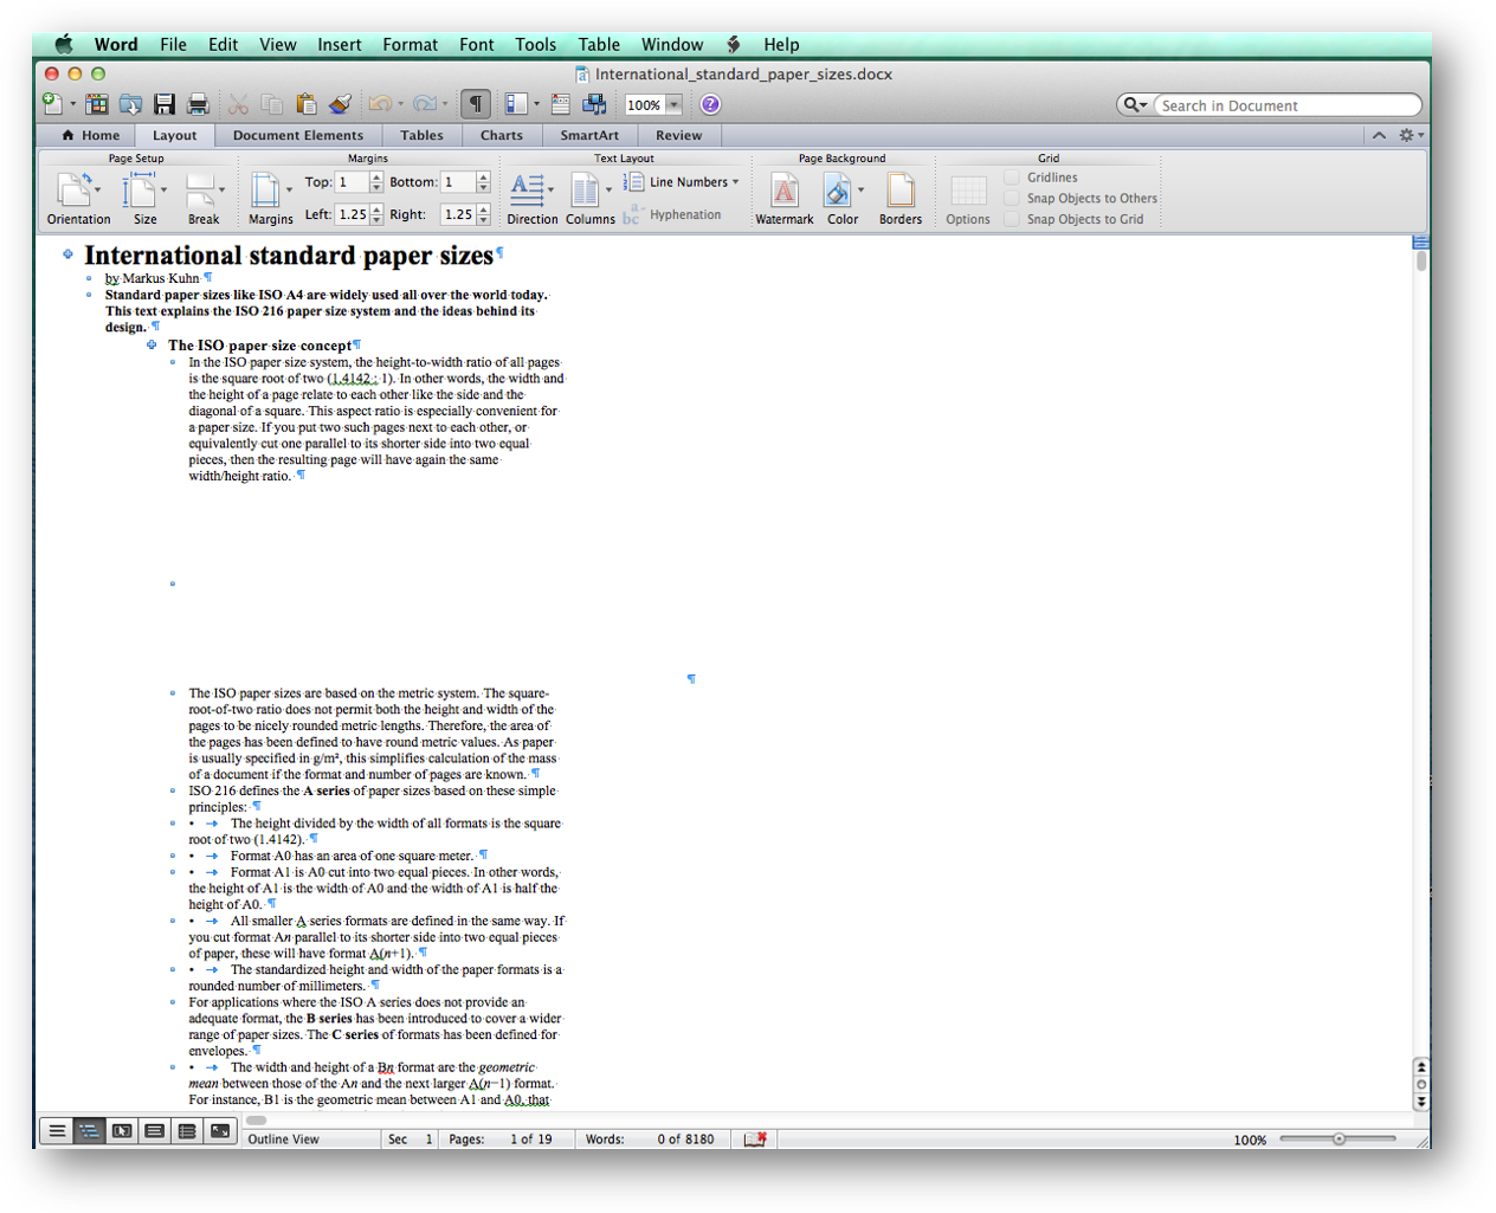 [MSWord 2013 outline view]